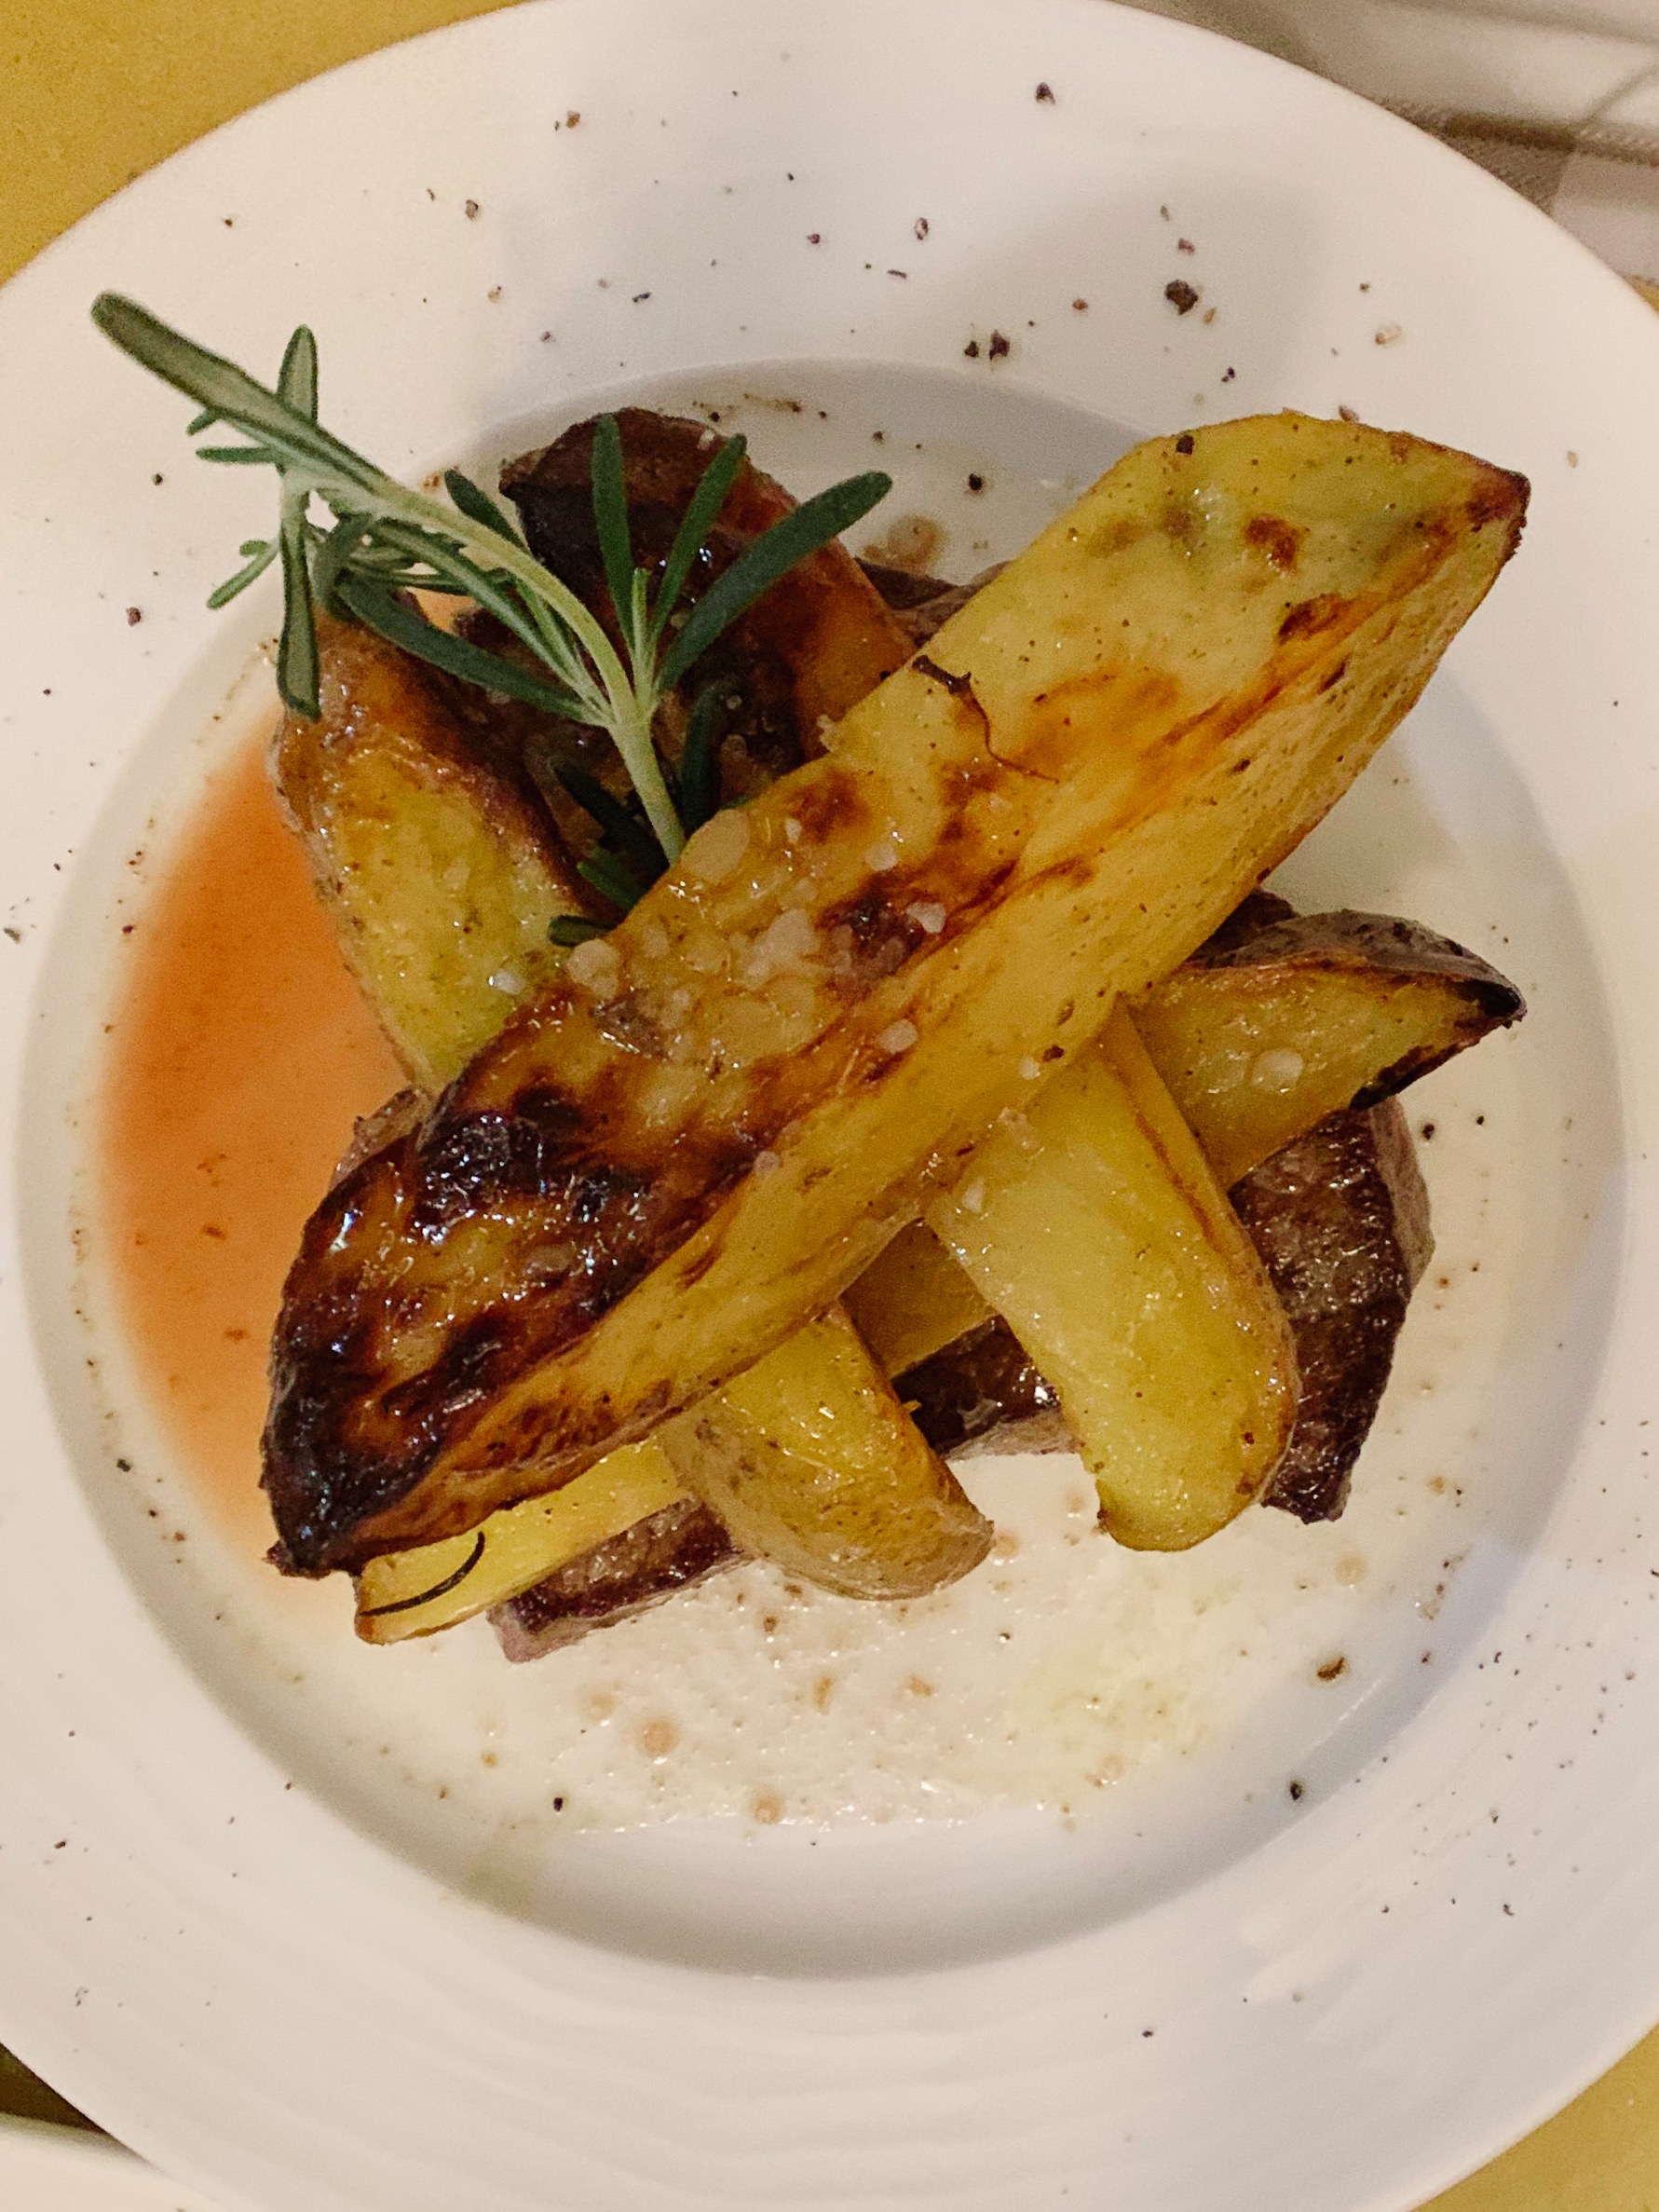 Gessetto’s disappointing Steak & Potatoes 